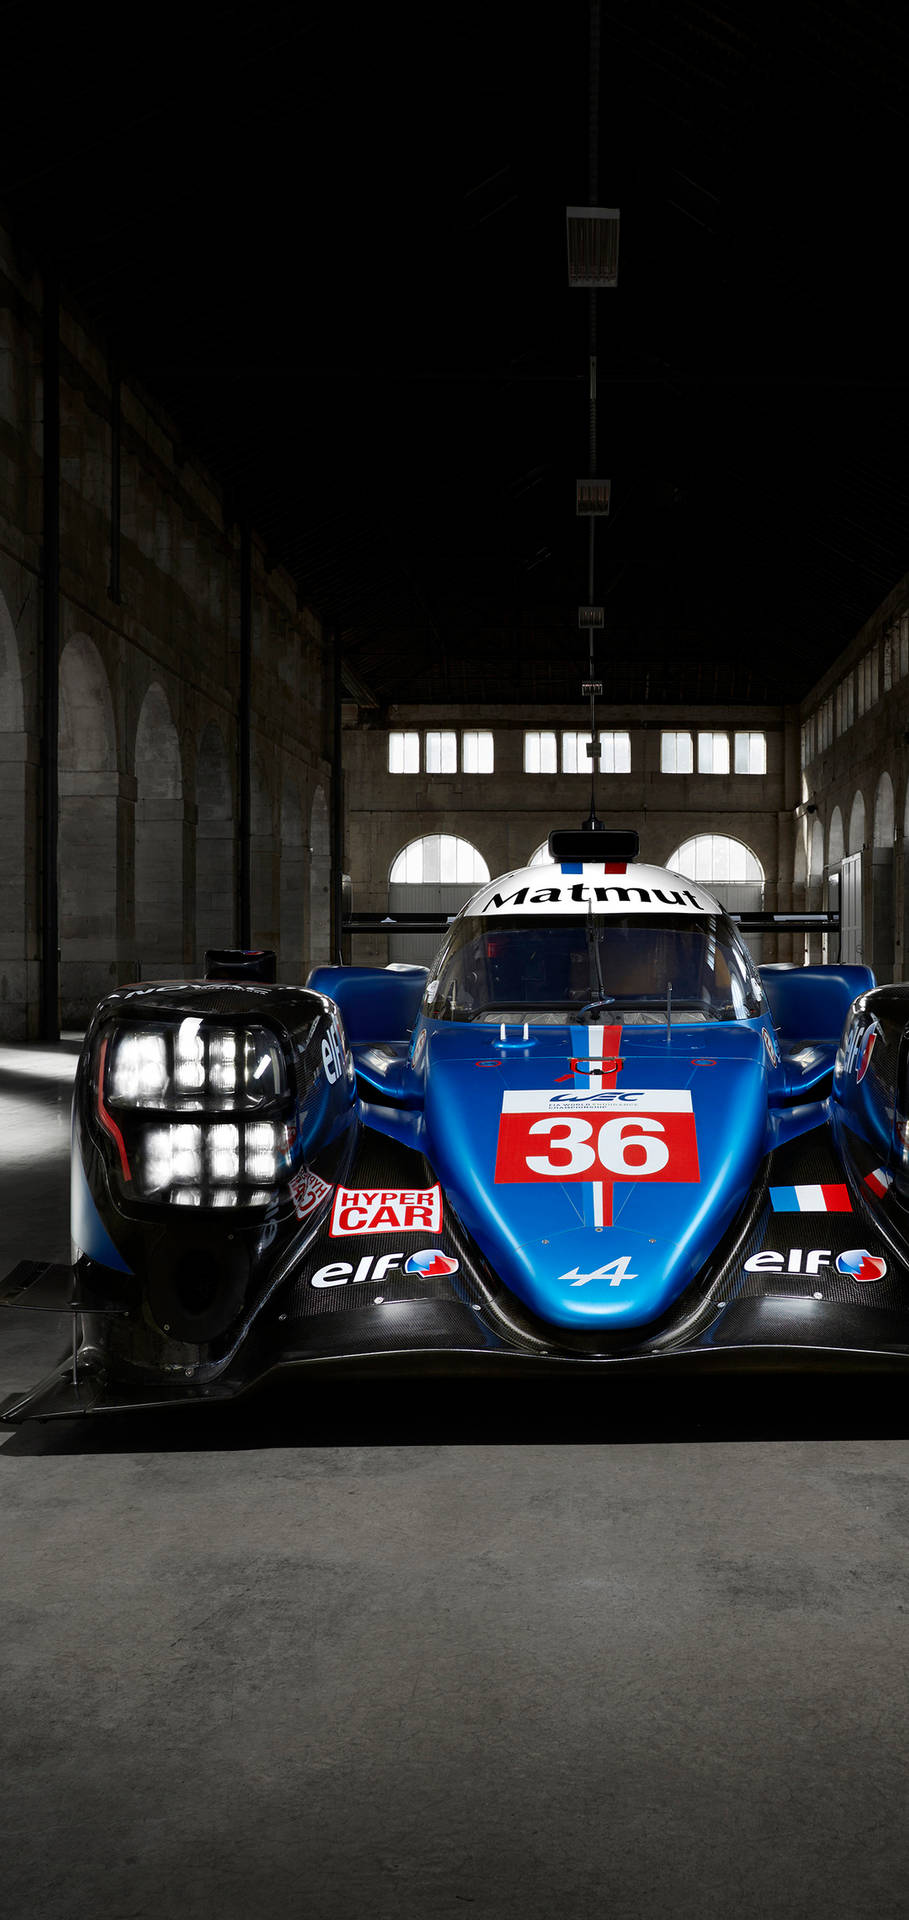 Front View Of Alpine Car 36 Wallpaper